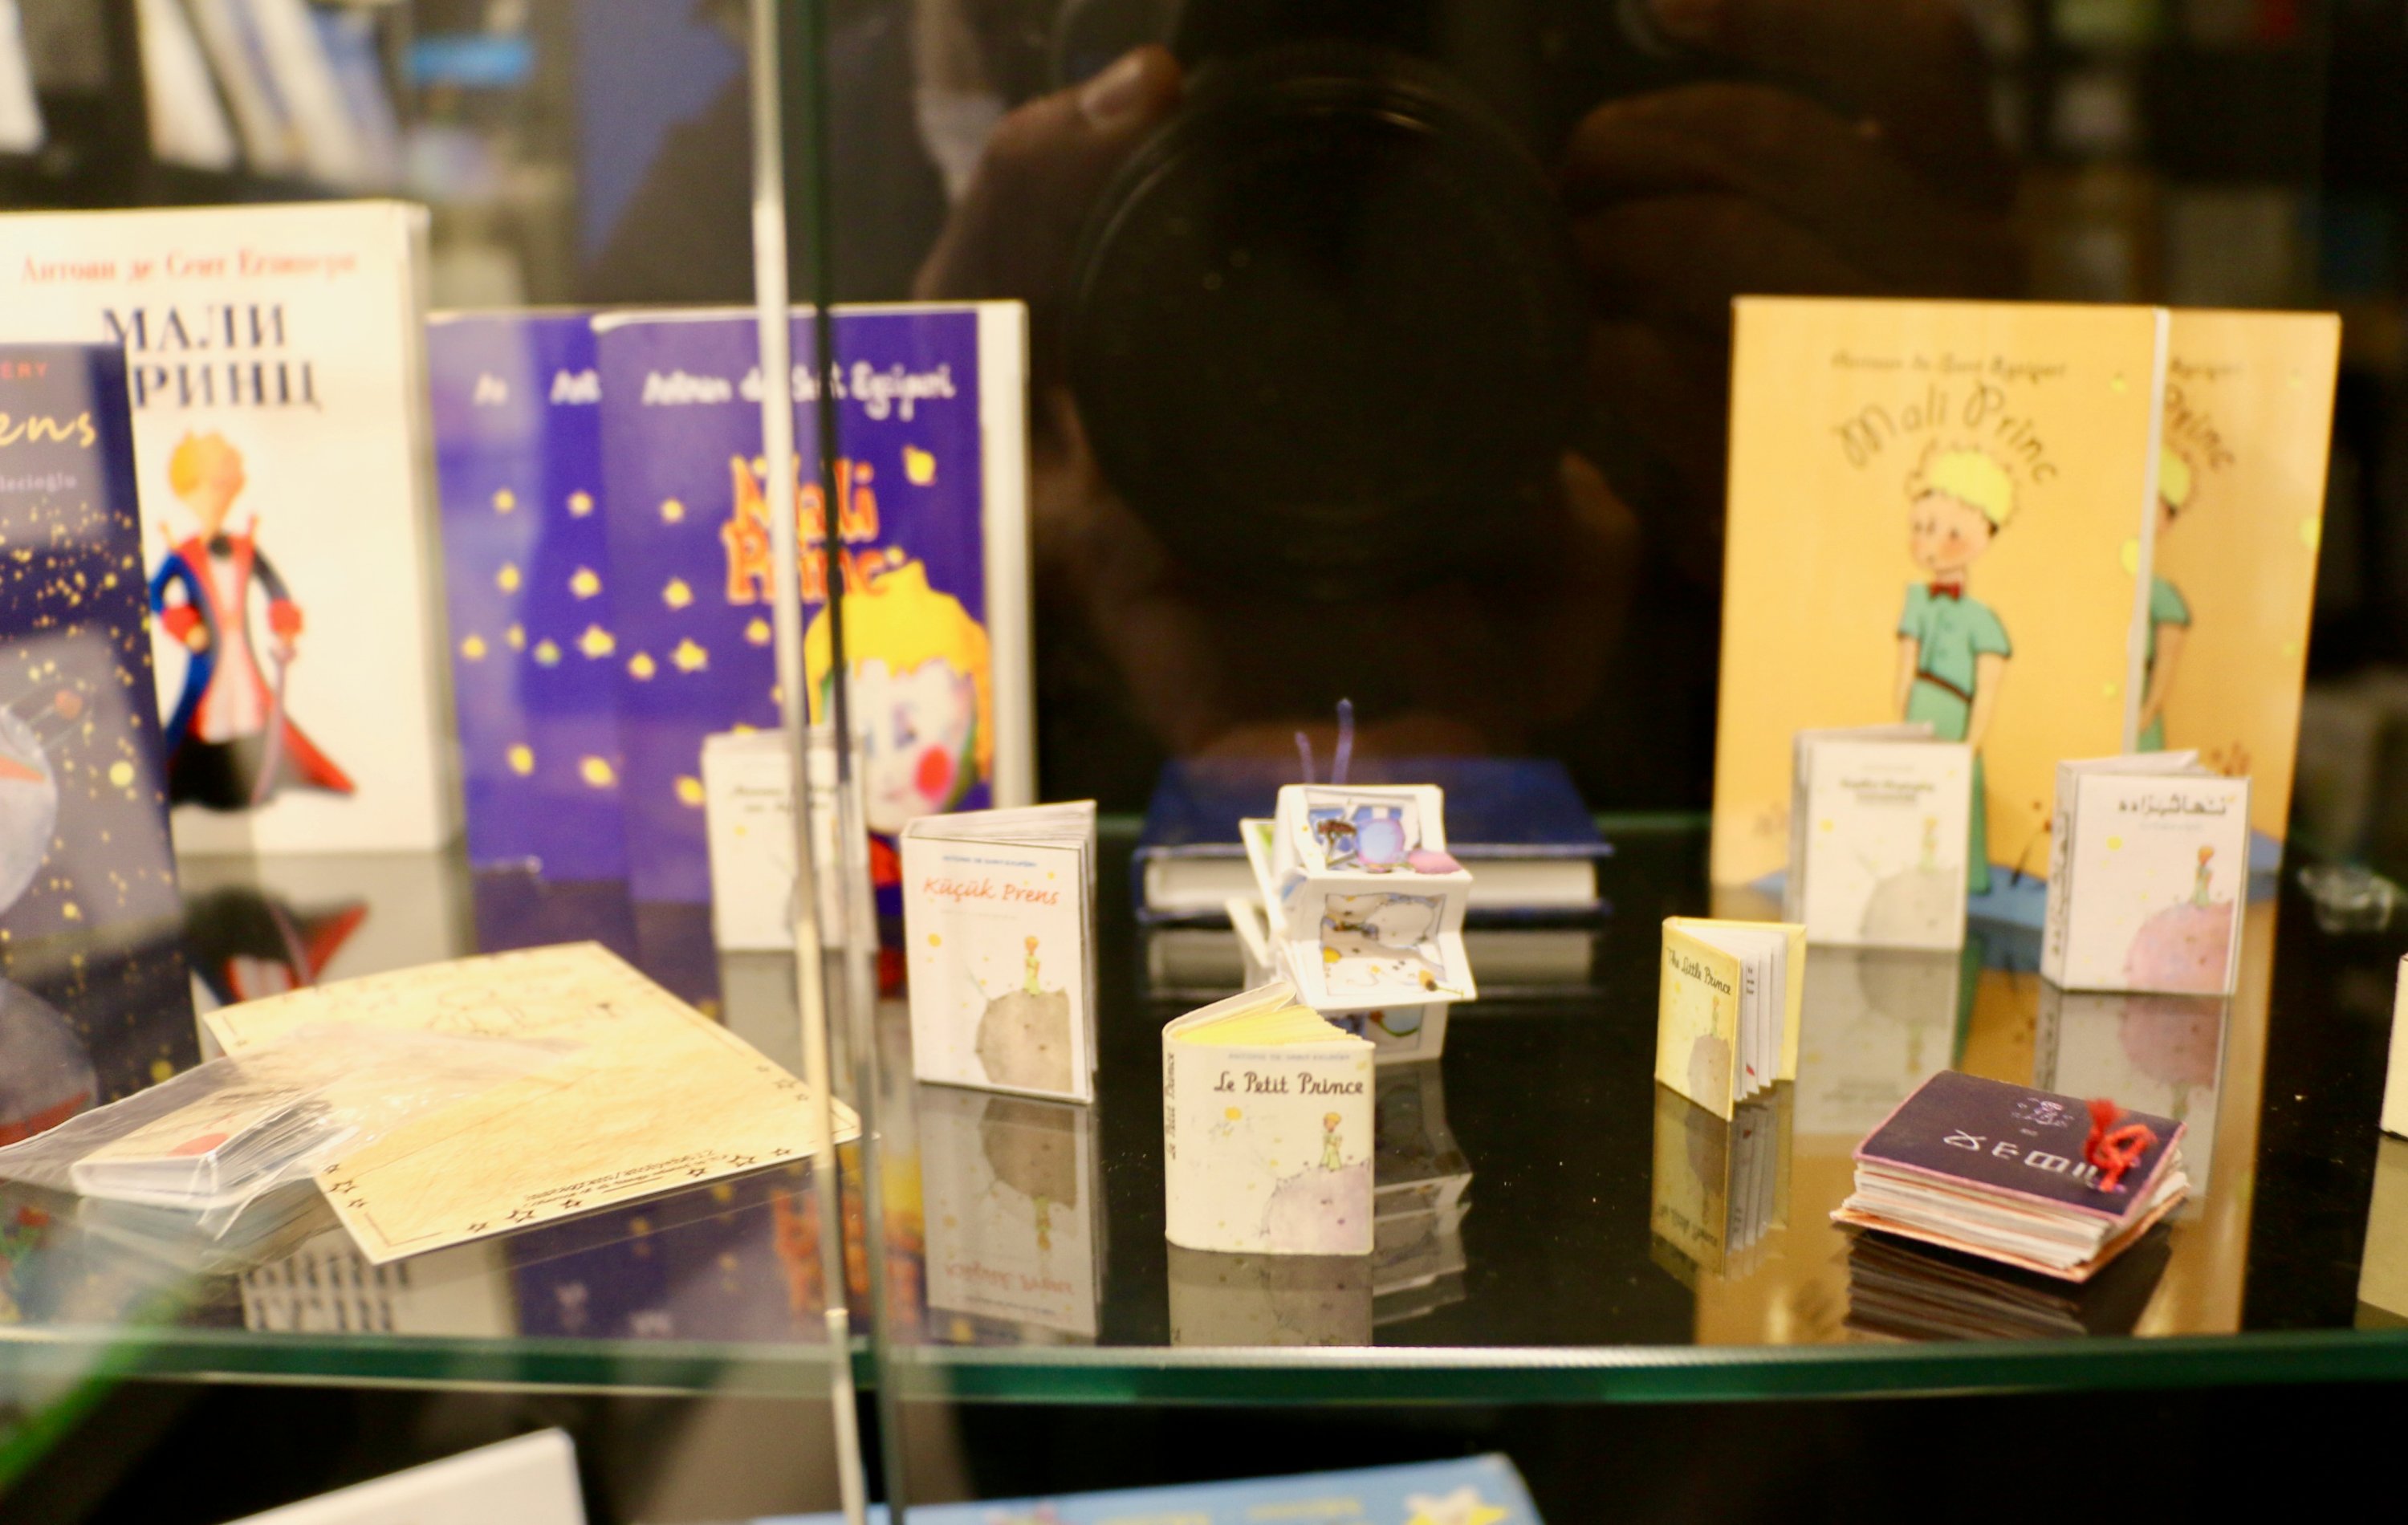 The smallest edition of 'The Little Prince' is seen at the museum in Eskişehir, Turkey, July 5, 2020. (AA Photo)